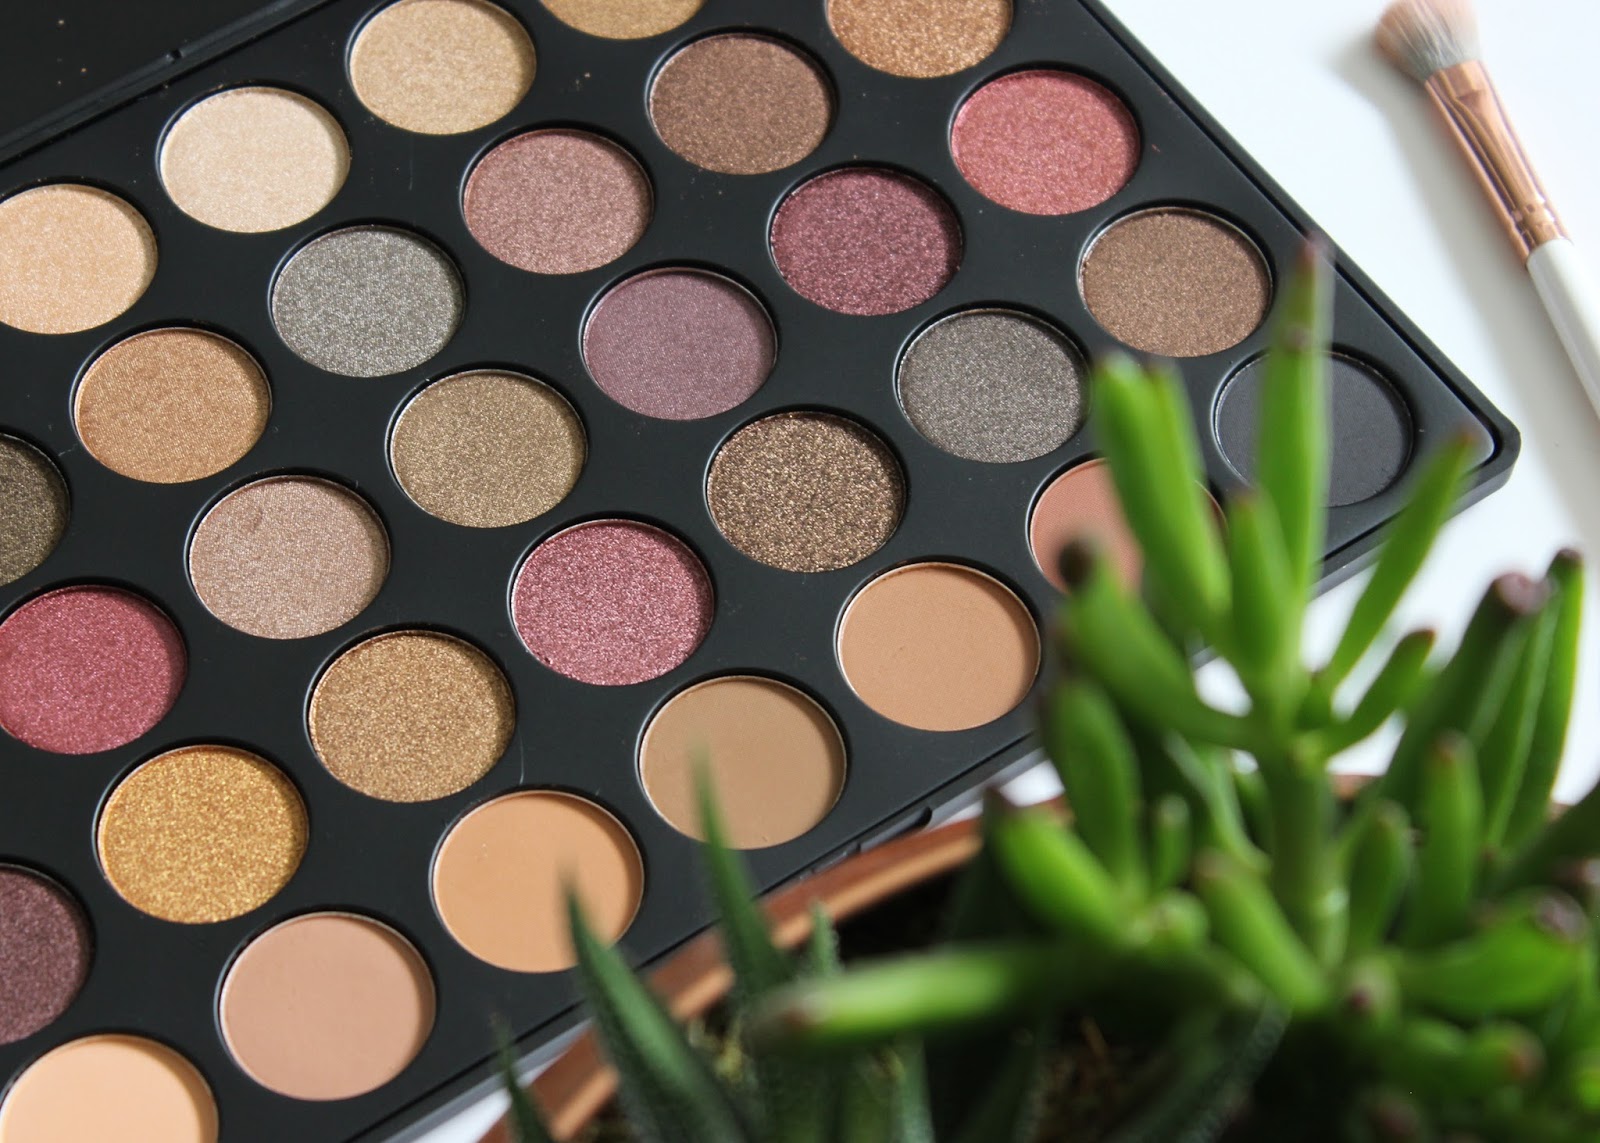 Morphe 35F 'Fall Into Frost' Eyeshadow Palette Review